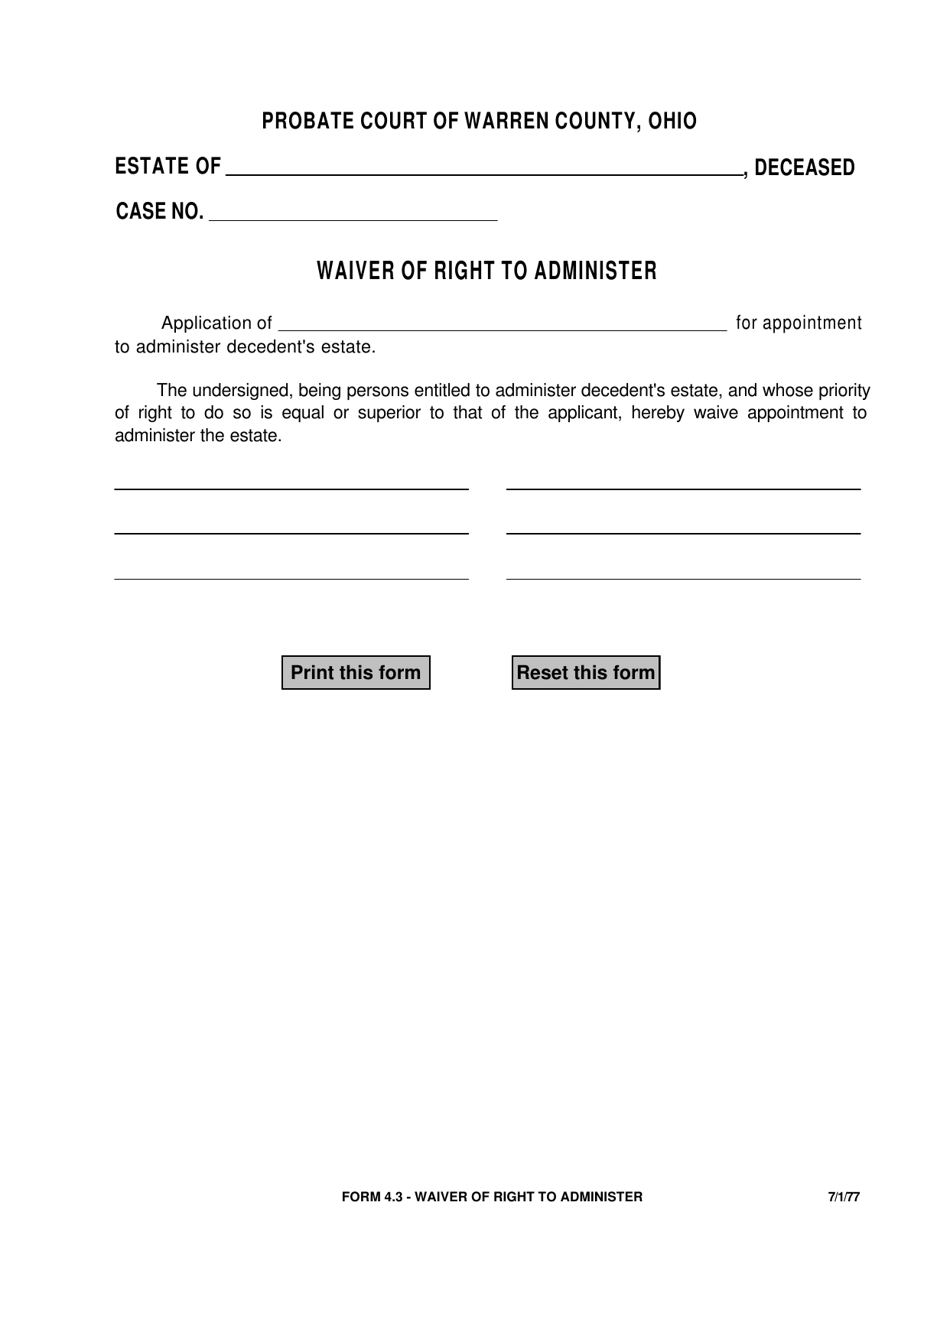 Form 4.3 Waiver of Right to Administer - Warren County, Ohio, Page 1